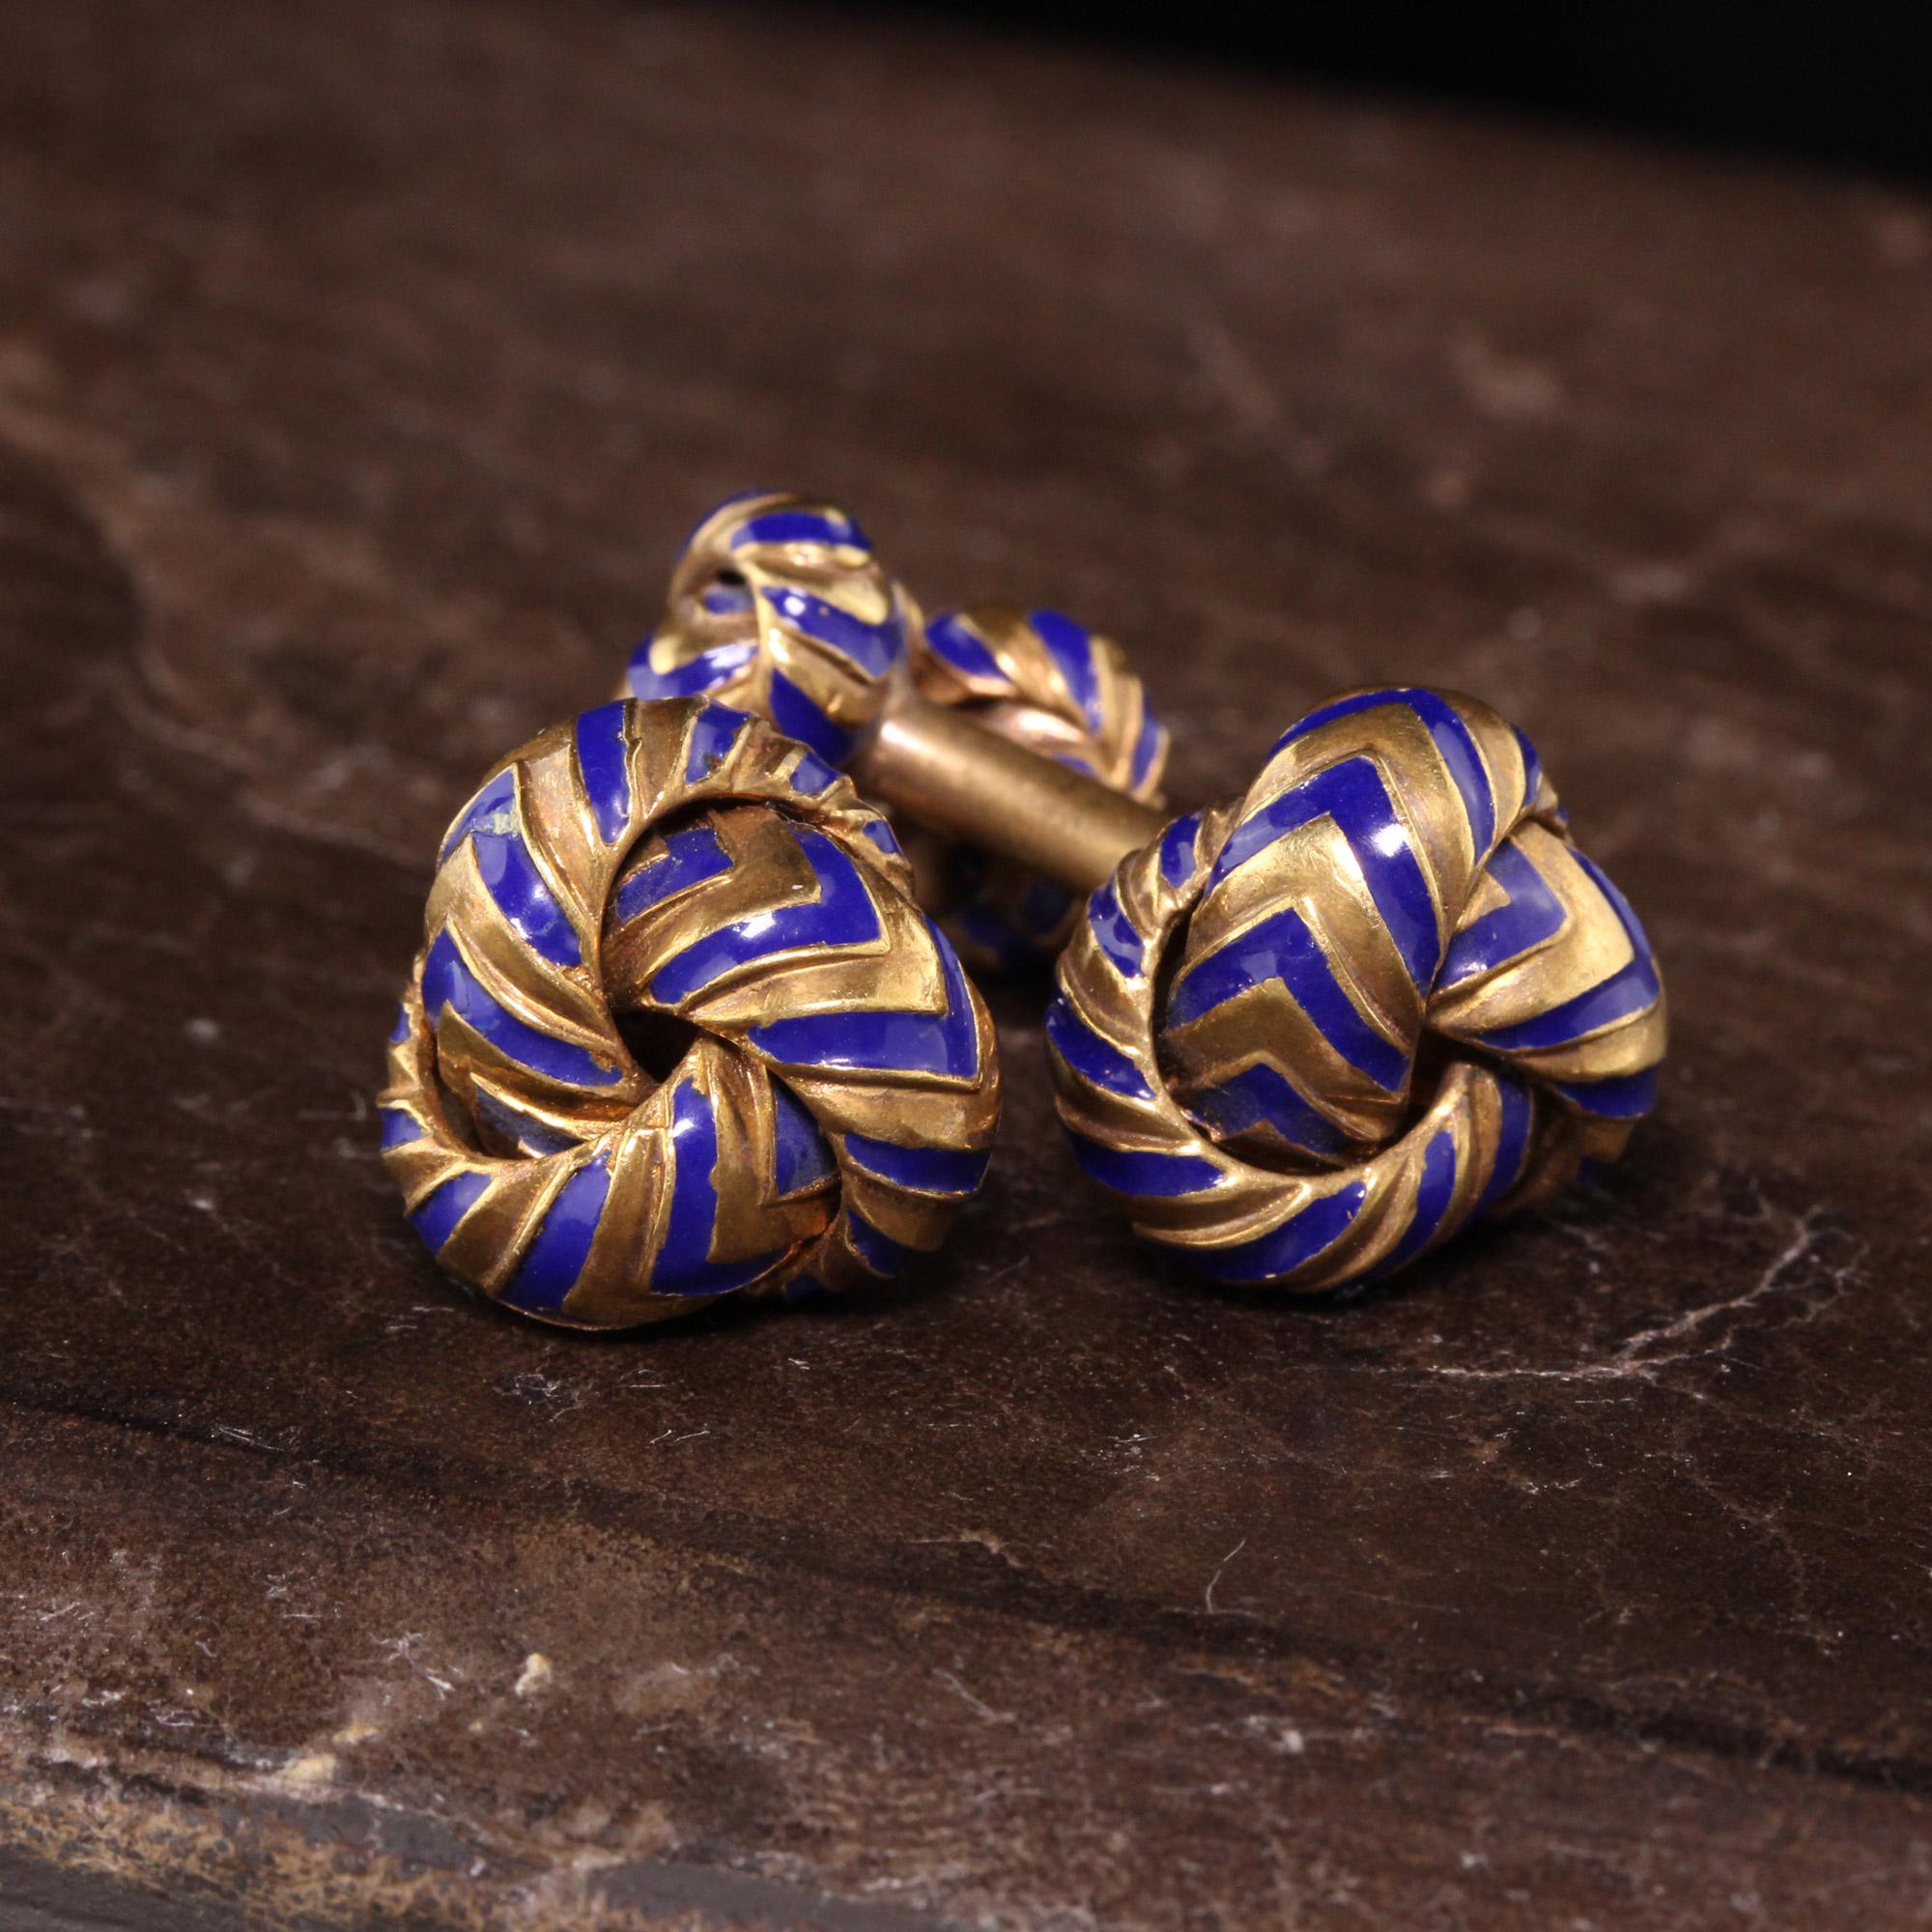 A gorgeous and pristine Vintage Estate 18K Yellow Gold and Blue Enamel Cufflinks. The enamel is in perfect condition and it has a gorgeous patina that only time can give.

Item #C0006

Metal: 18K Yellow Gold

Weight: 21.4 Grams

Measurements: Large